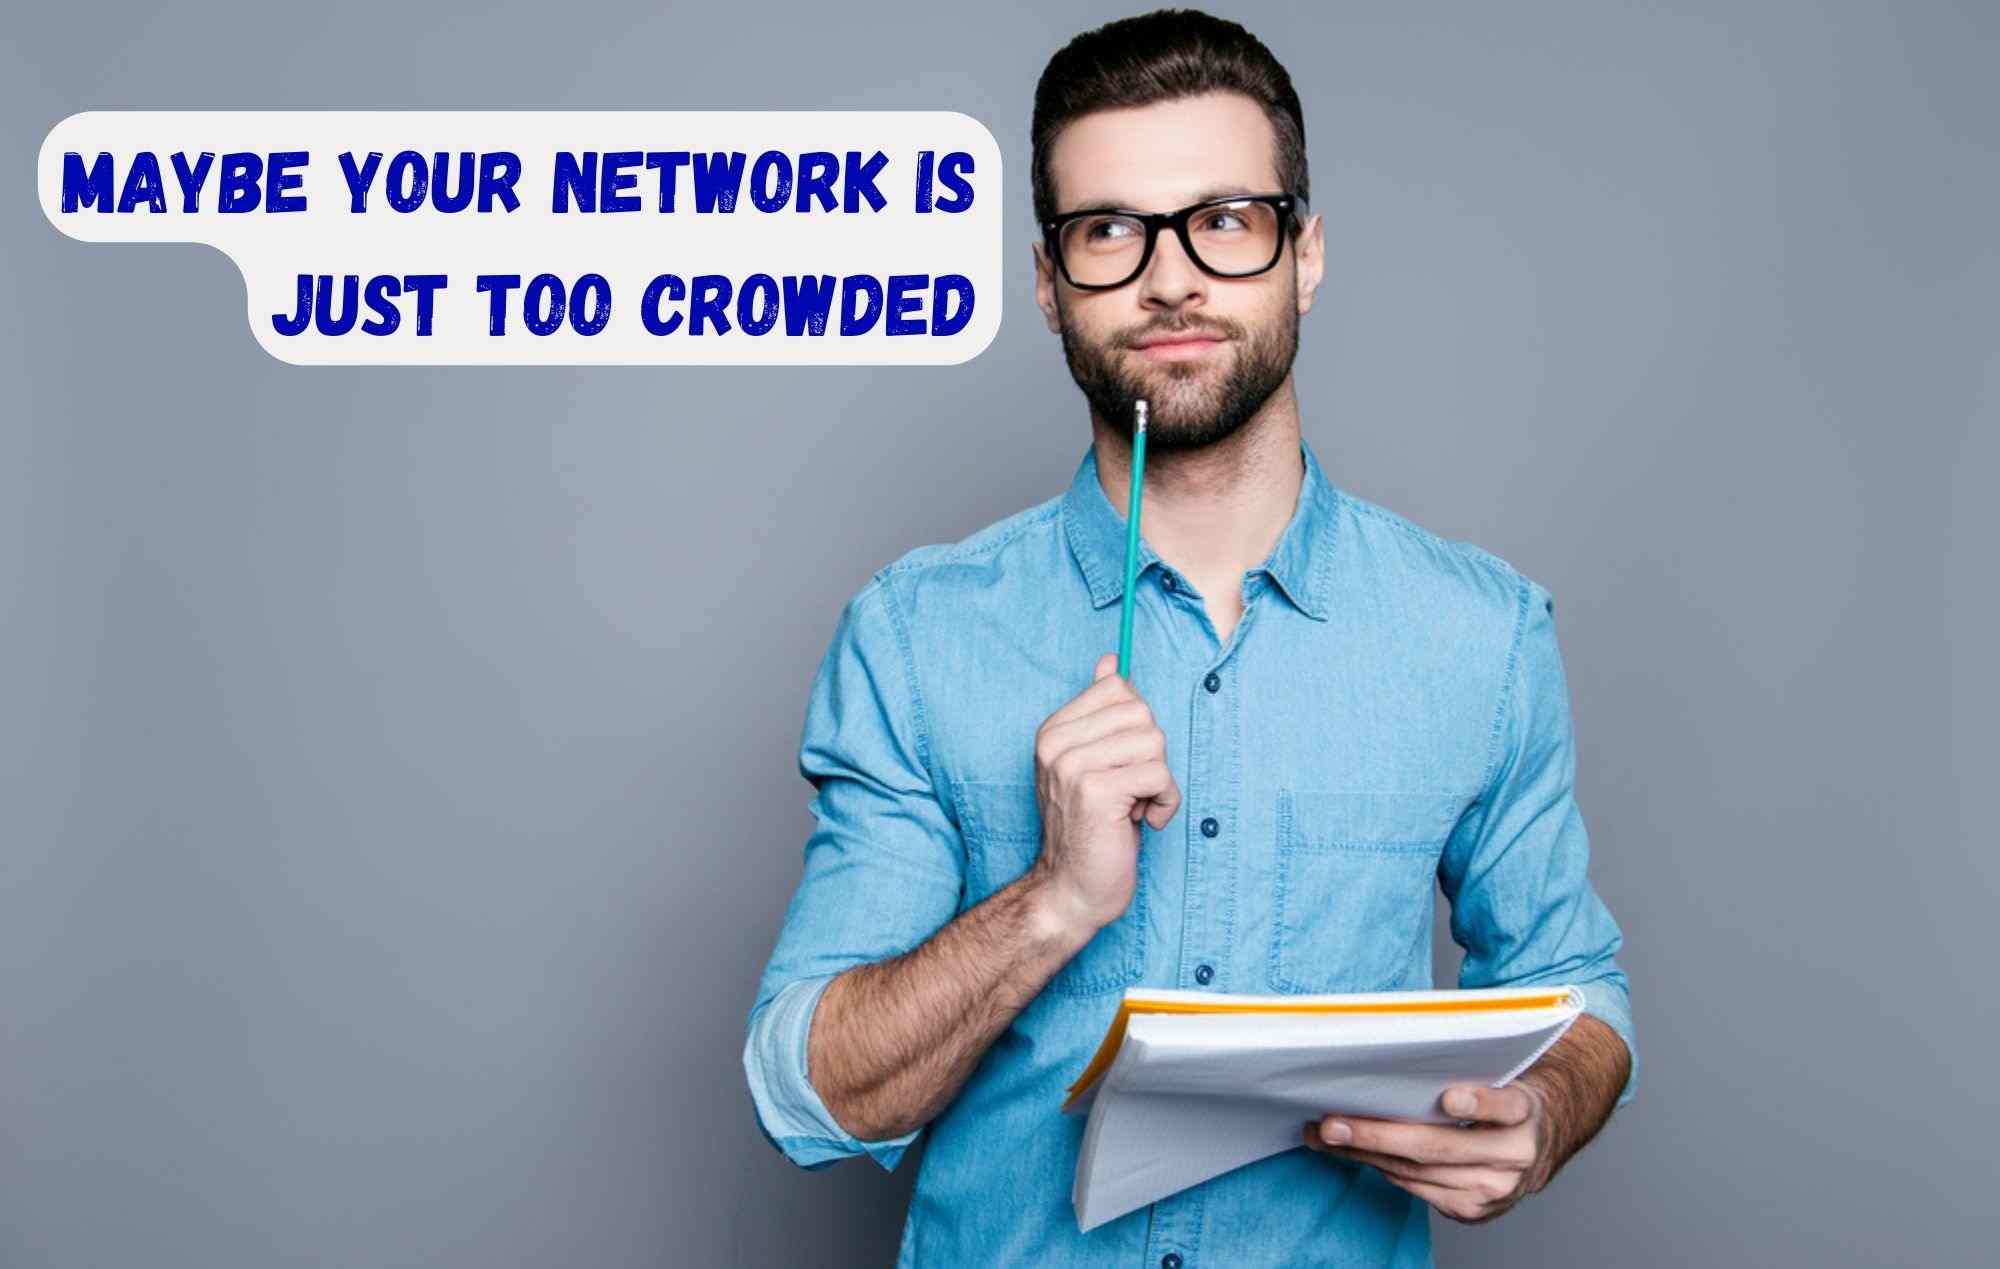 Maybe your network is just too crowded